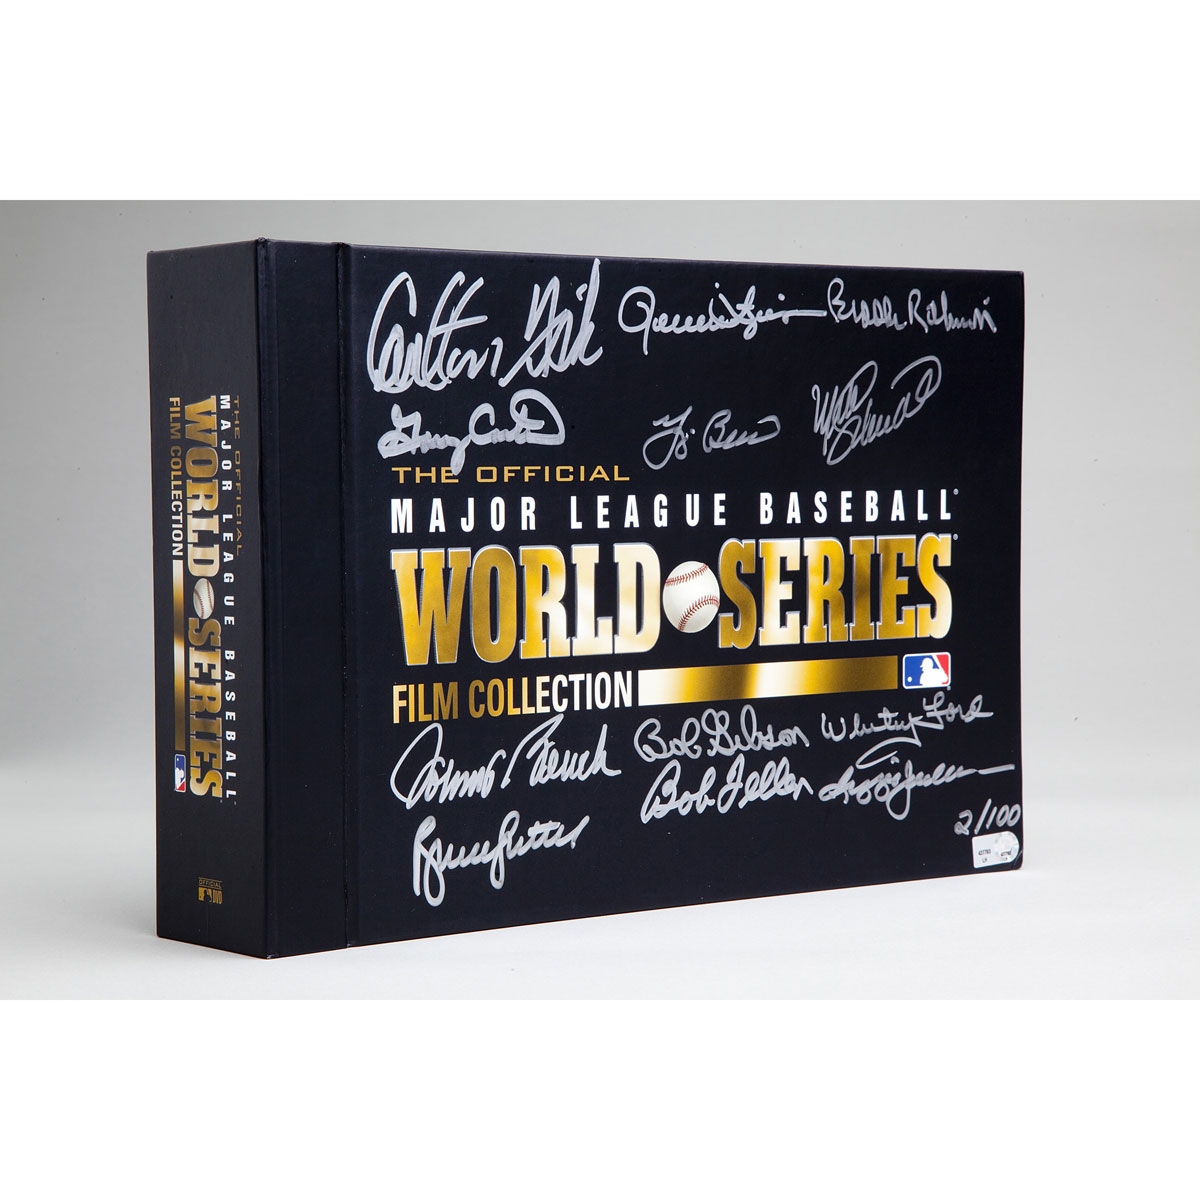 Seven decades of World Series highlights signed by 12 baseball